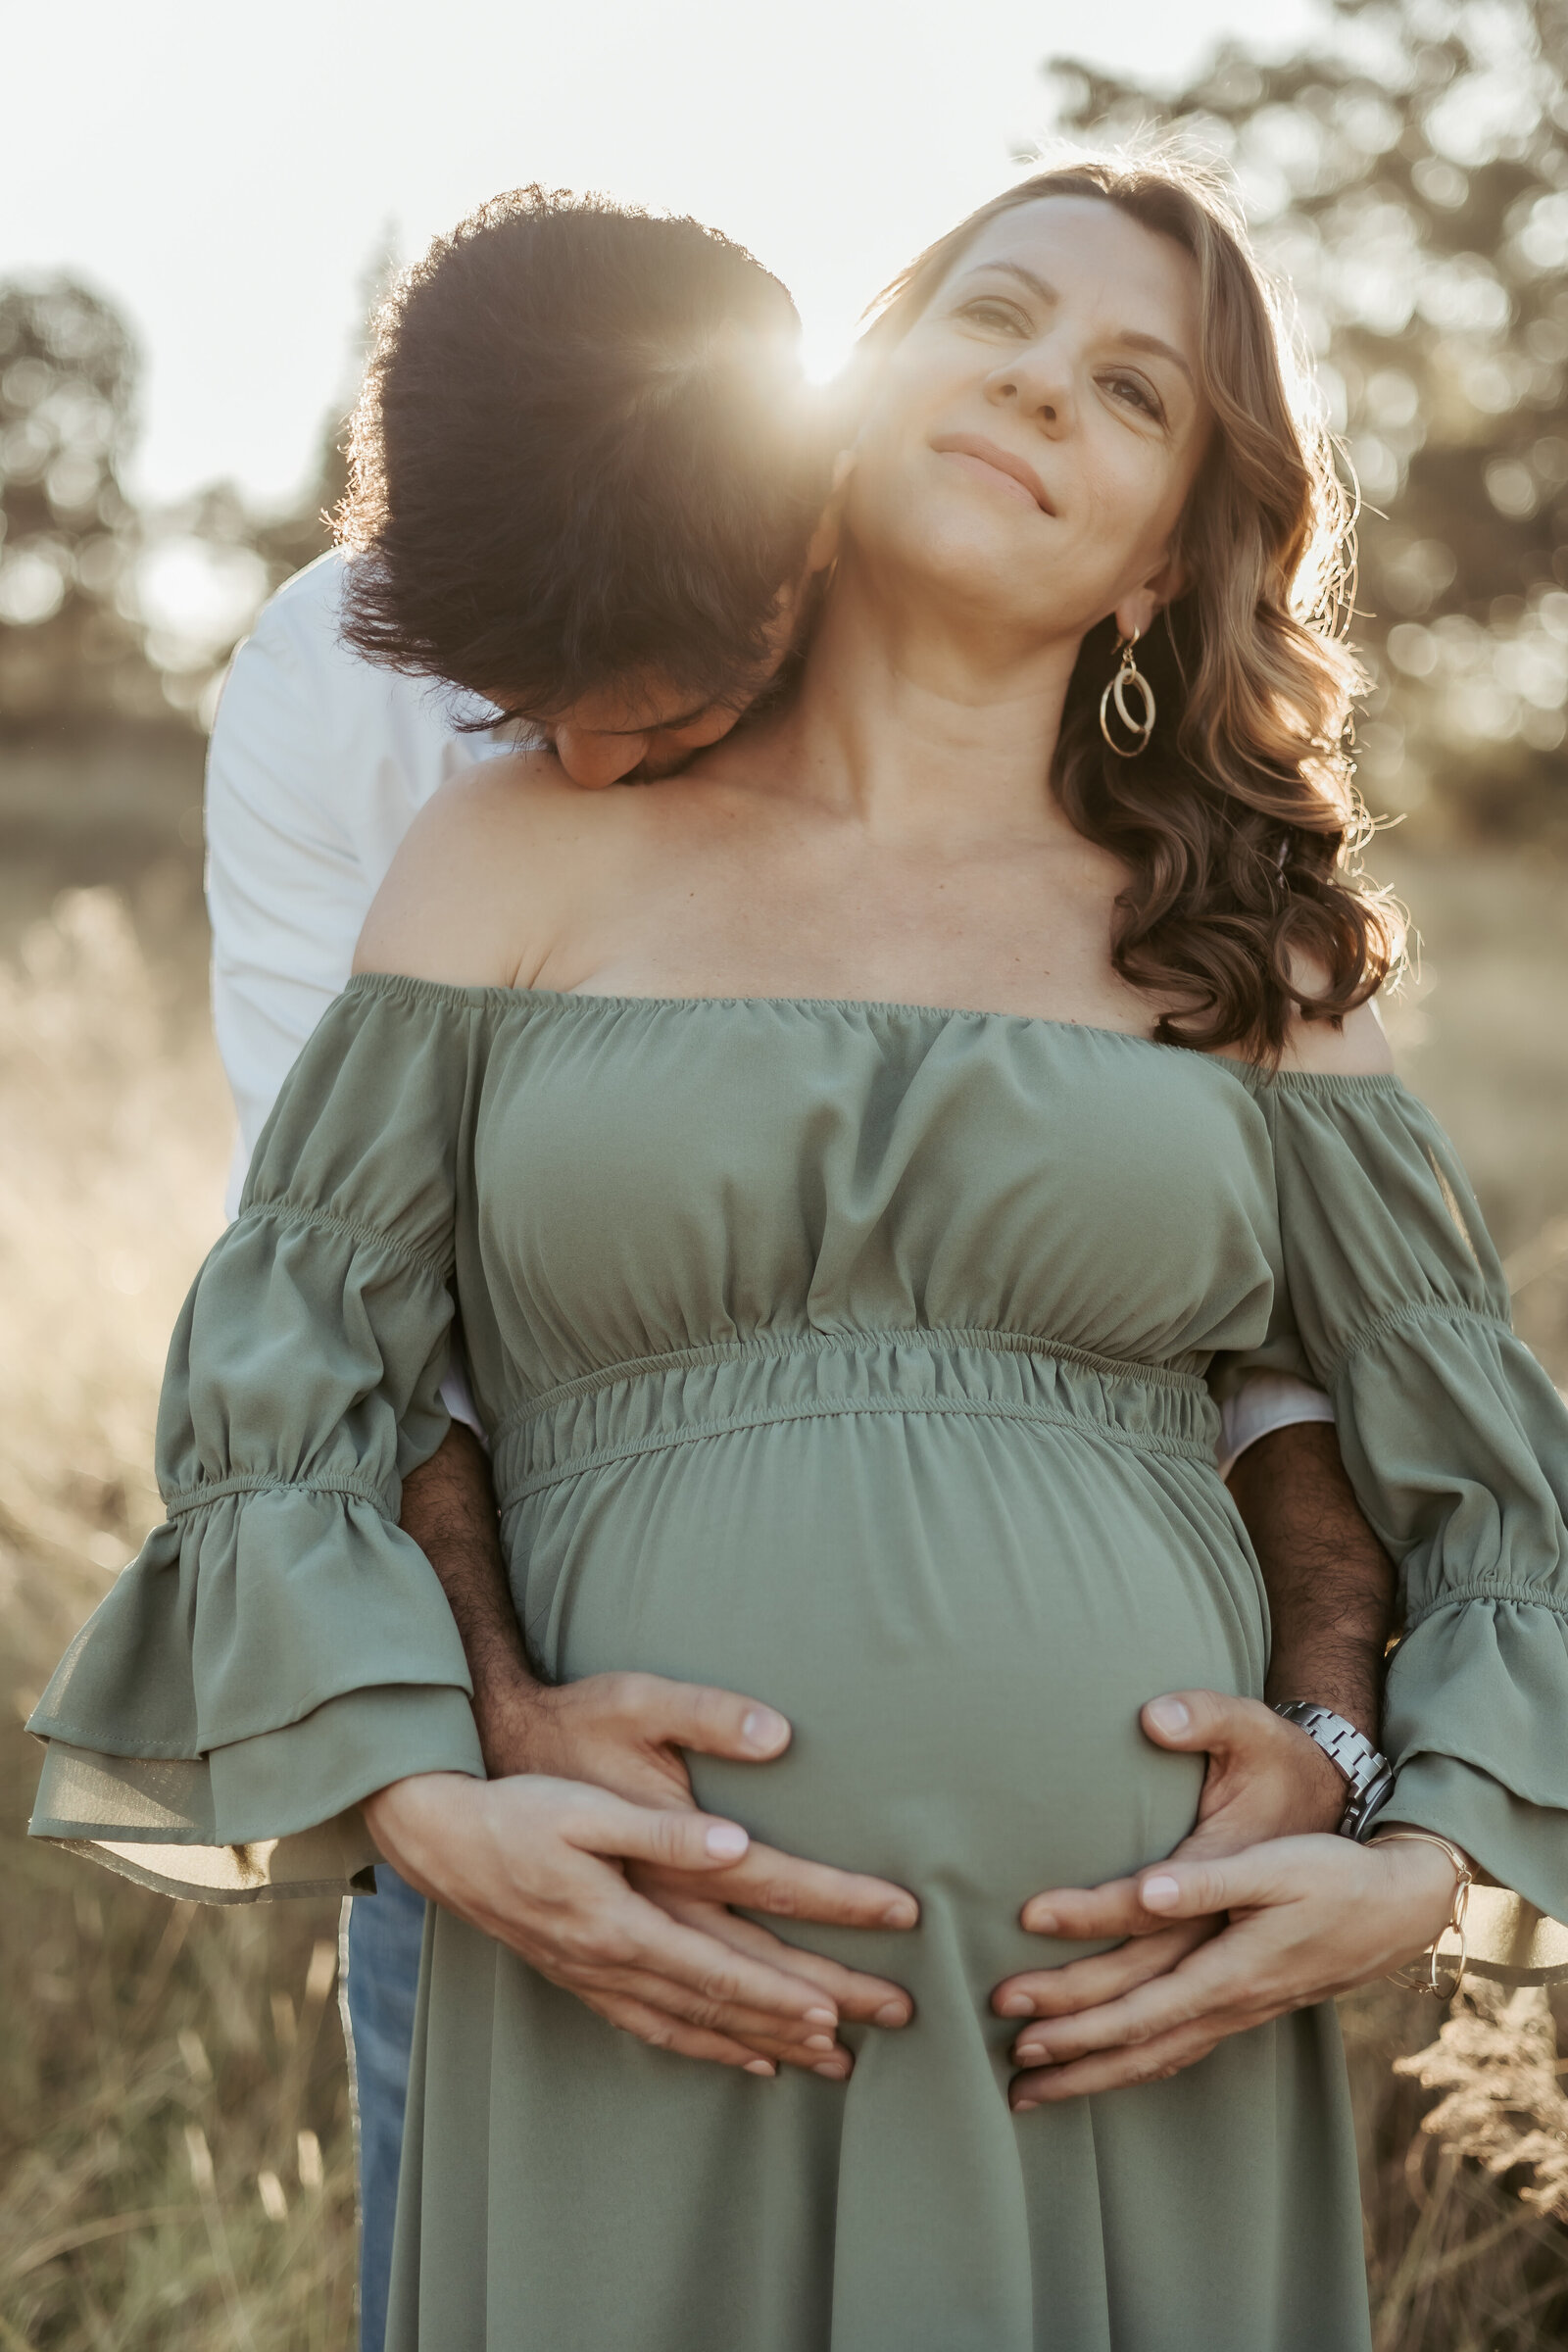 Pregnant mum in a green dress holding her growing bump  while partner is behind her kissing her neck and the sun glows between their heads